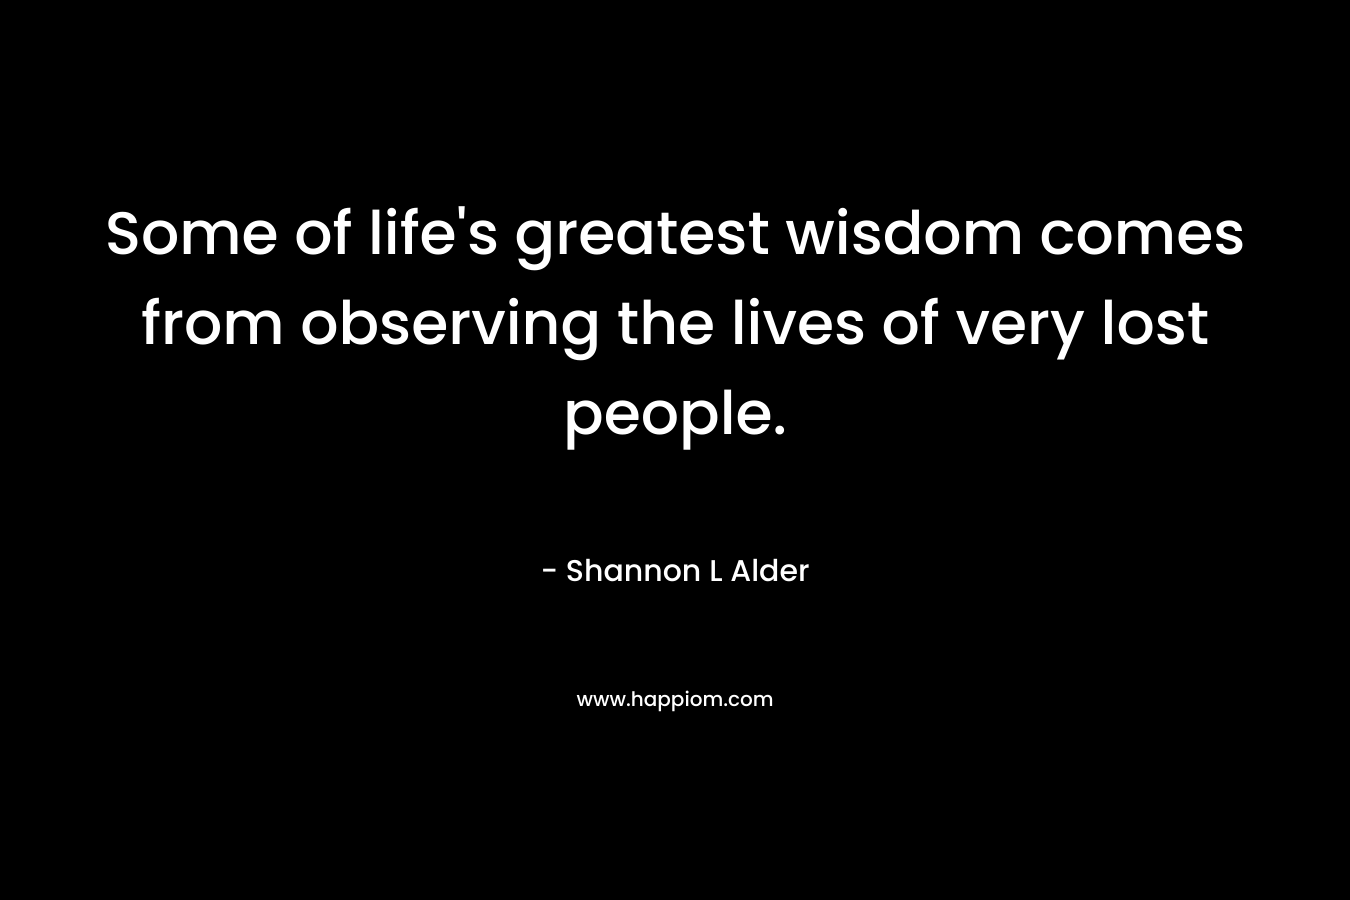 Some of life's greatest wisdom comes from observing the lives of very lost people.